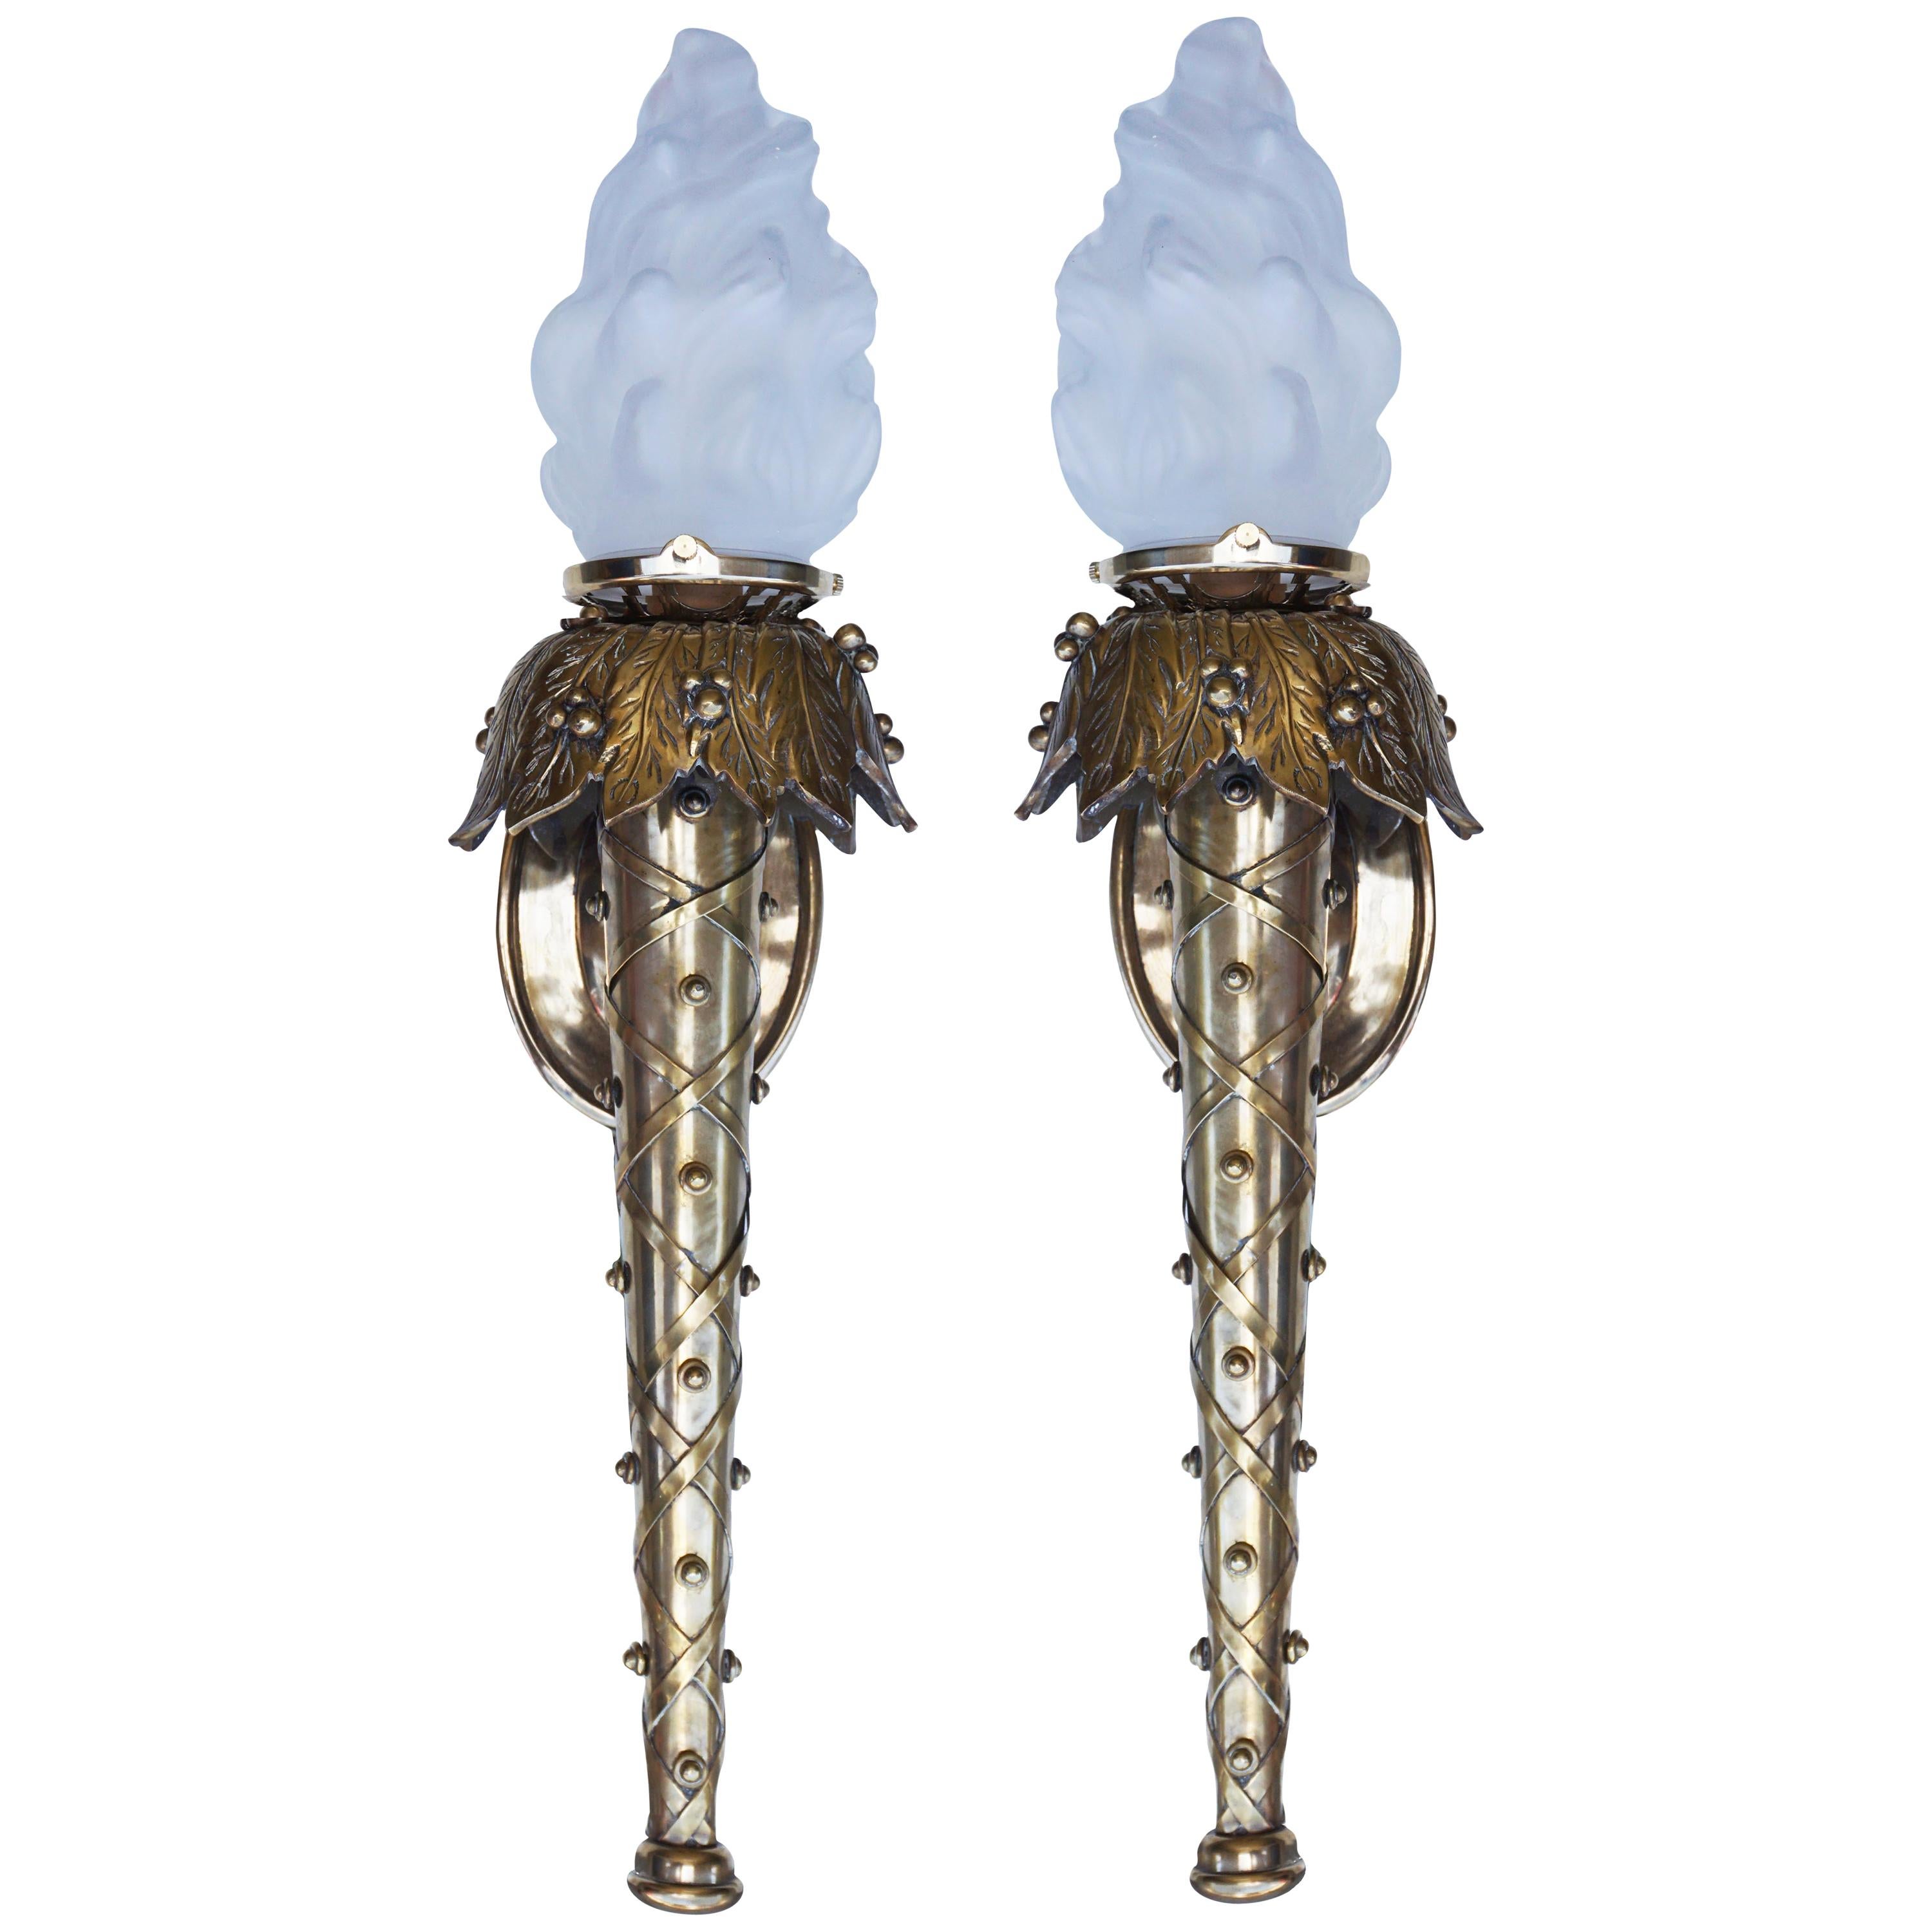 Pair of Studded Brass Torchère Wall Sconces